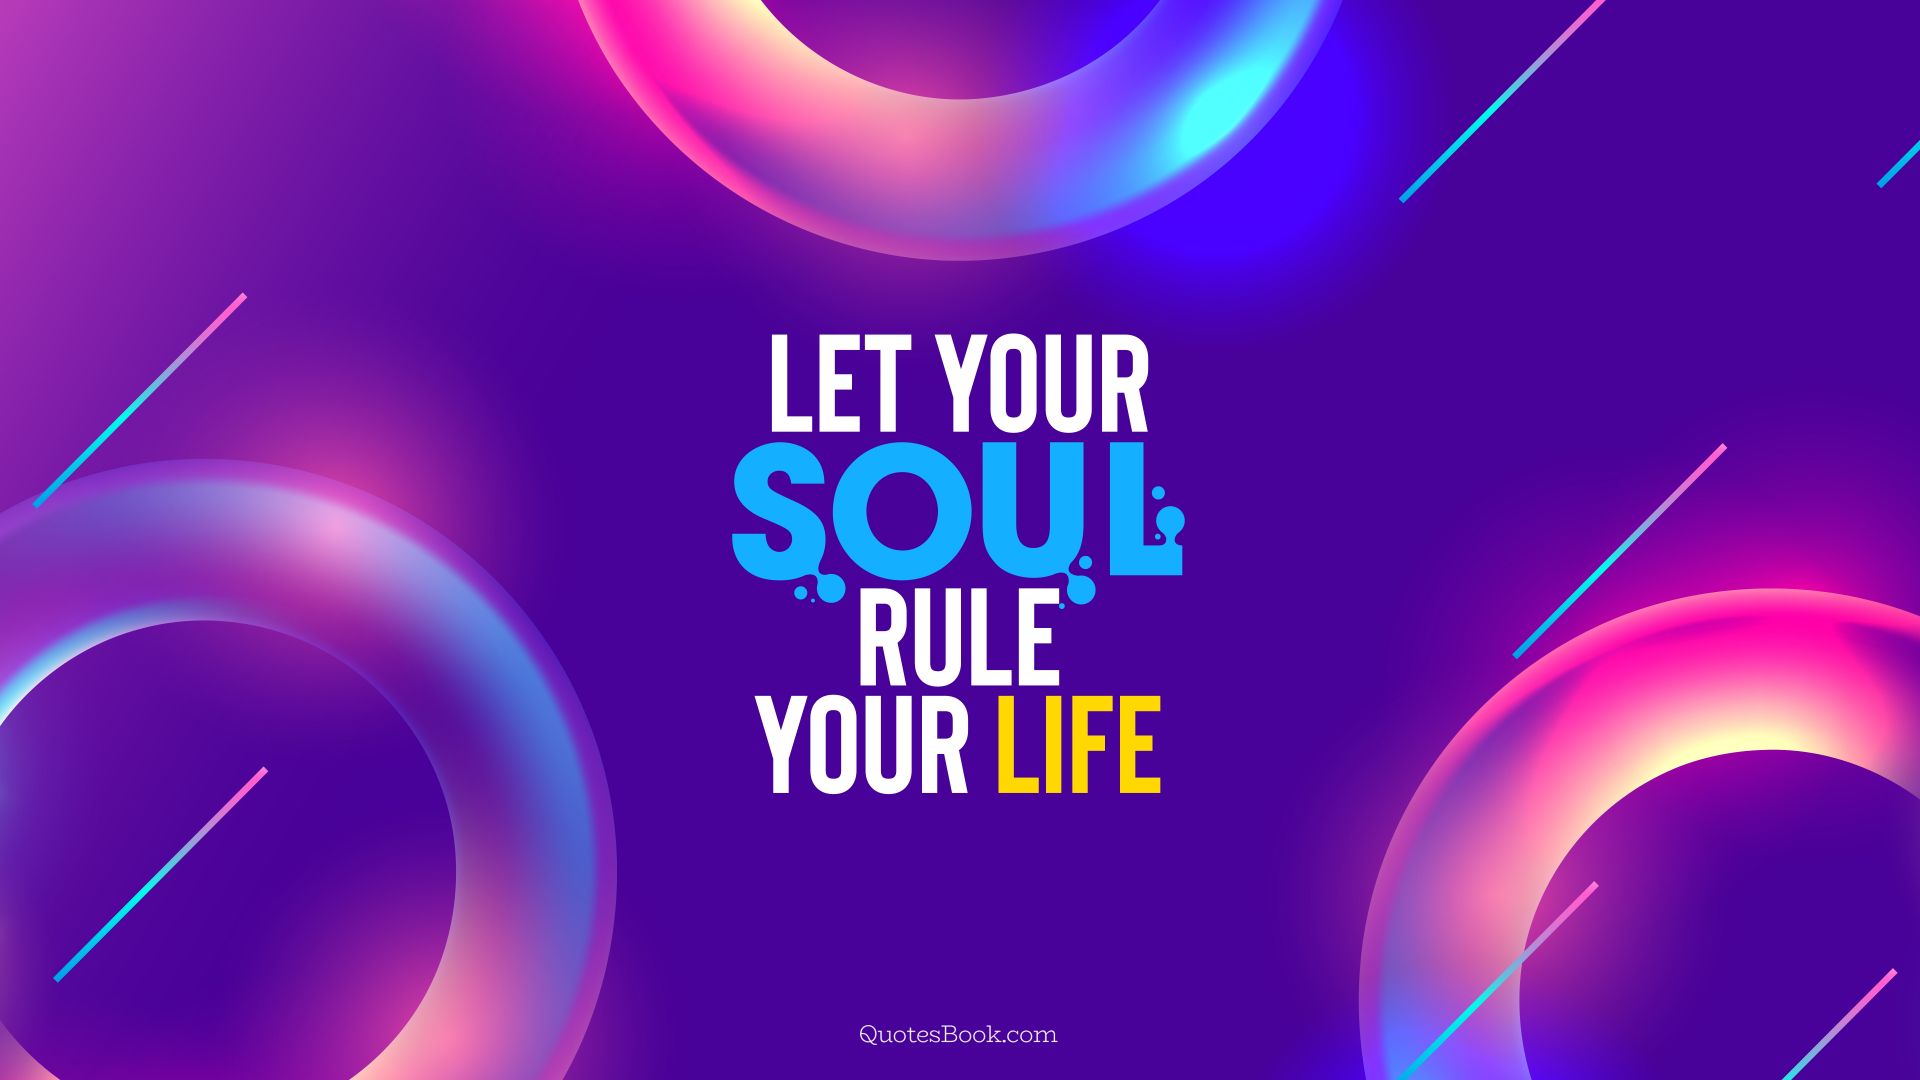 Let your soul rule your life